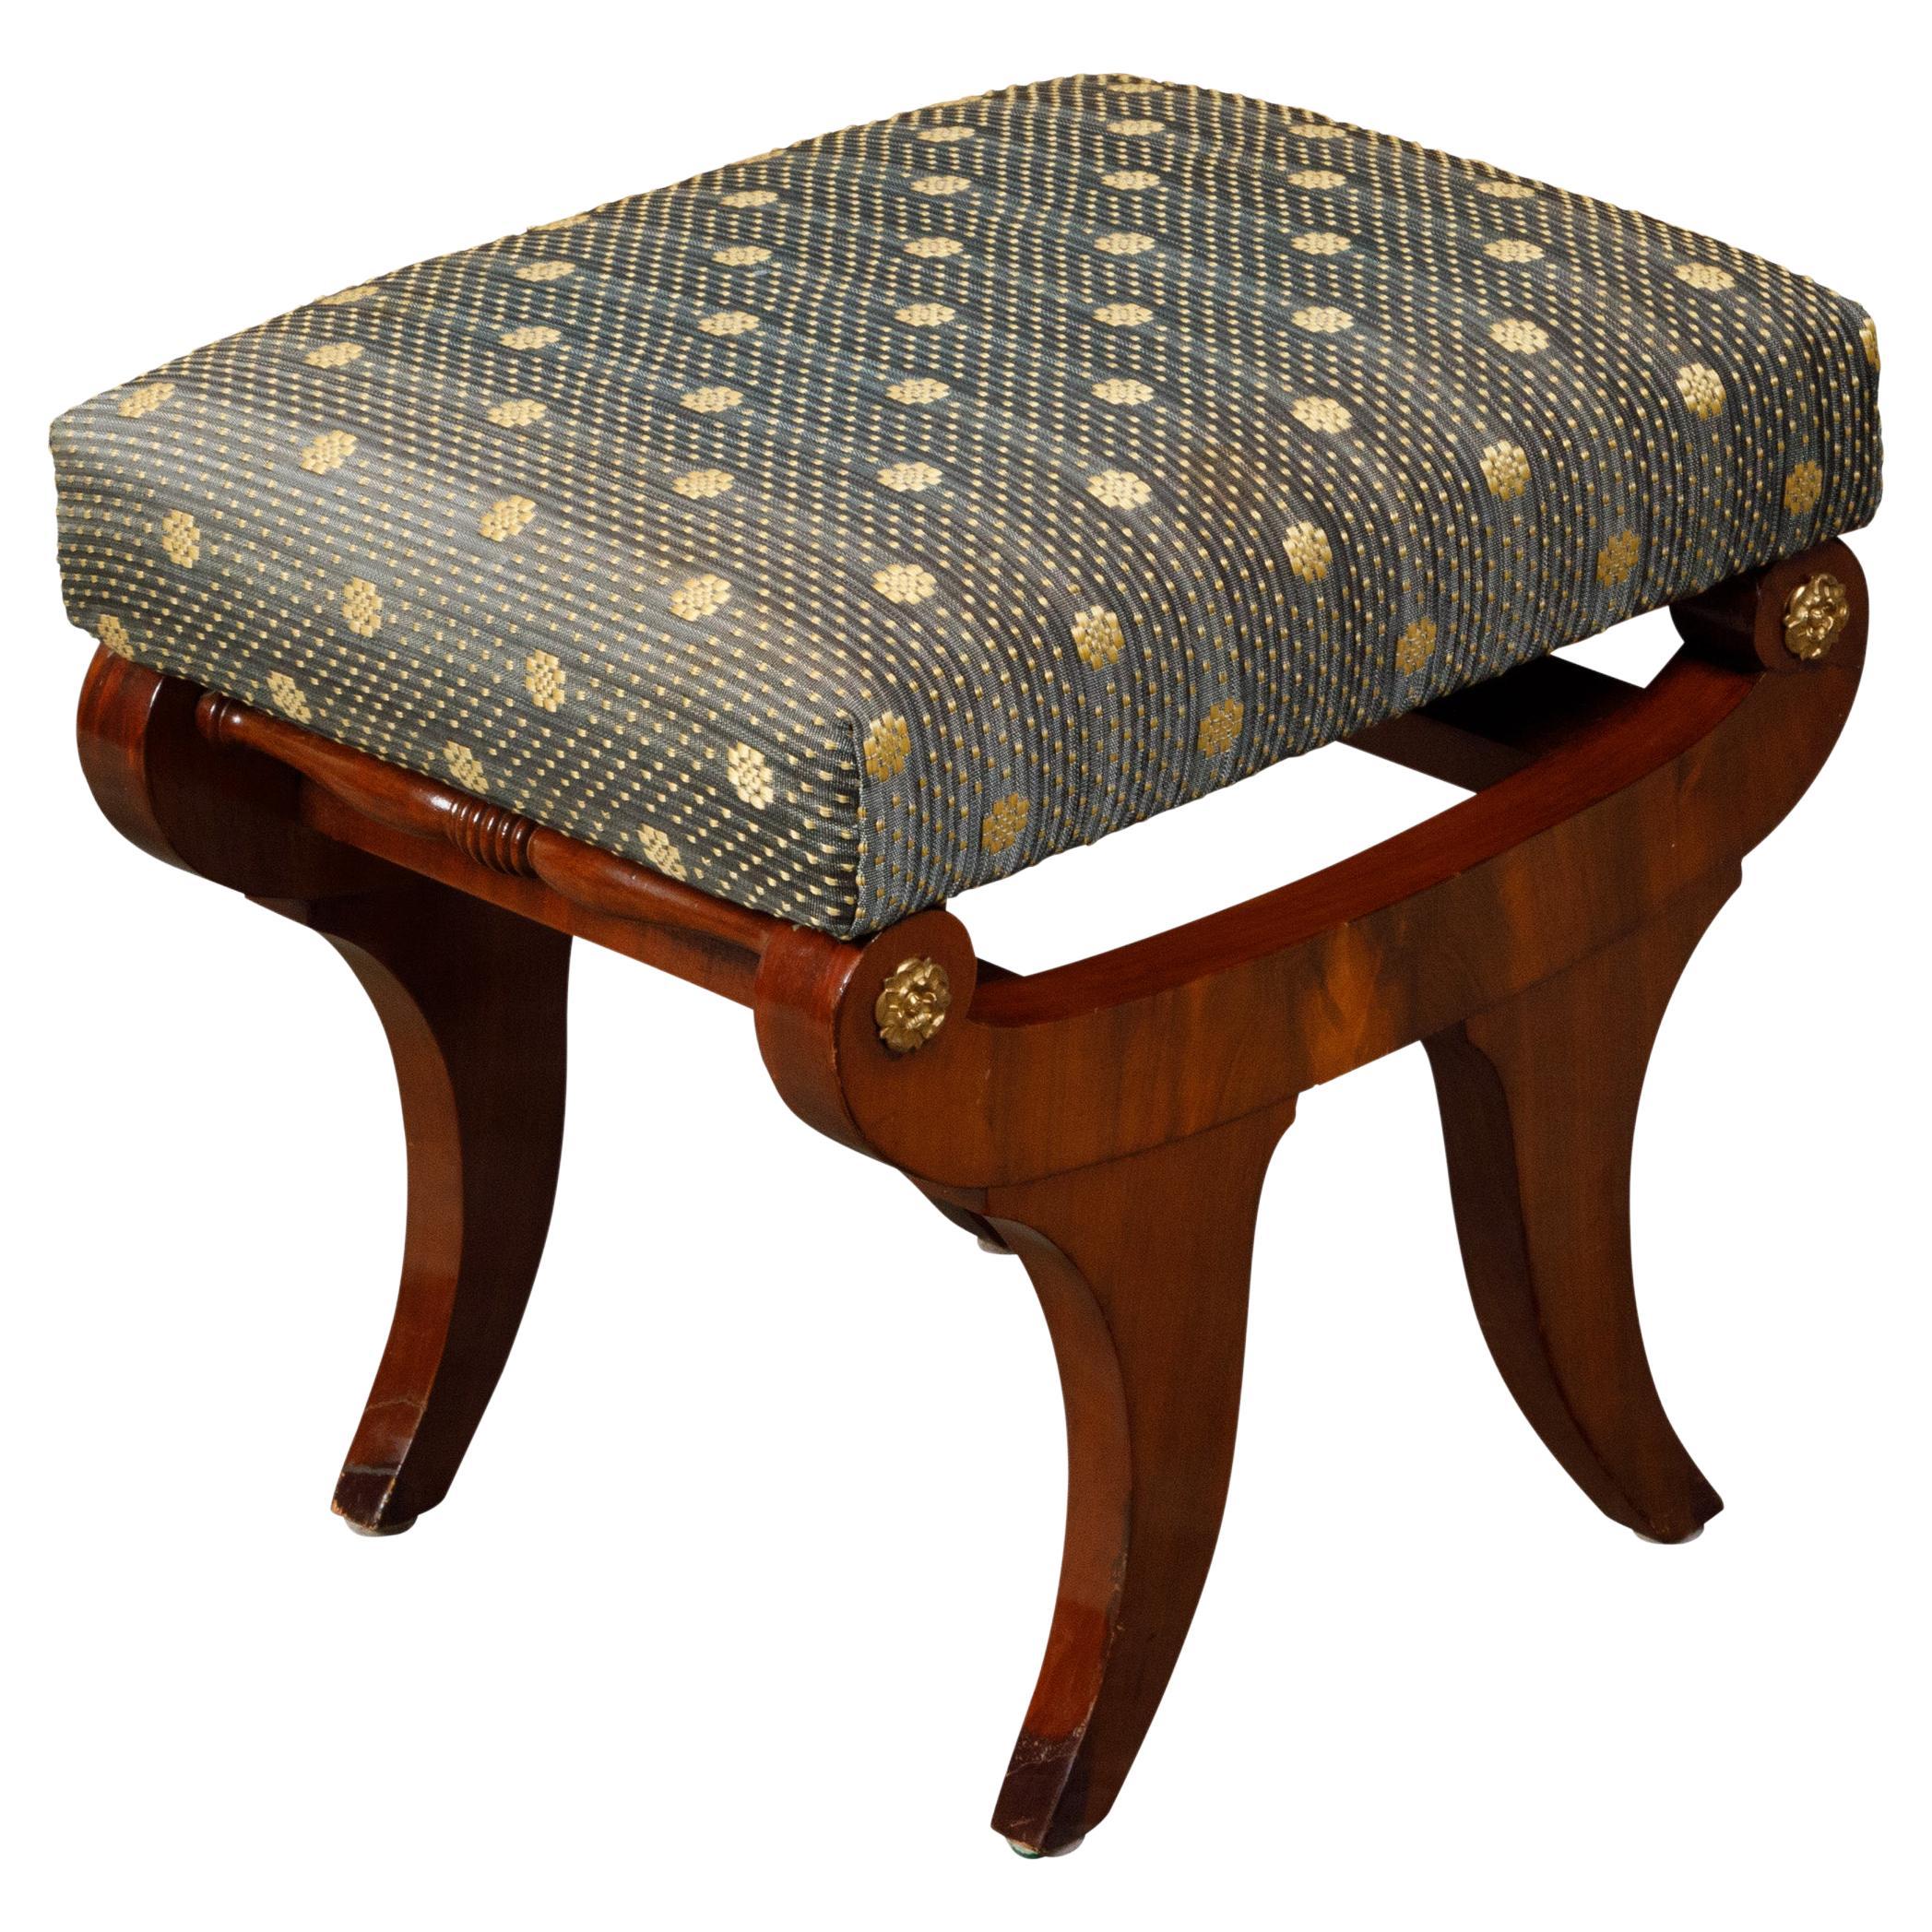 Biedermeier Period 19th Century Walnut Stool with Gilt Rosettes and Upholstery